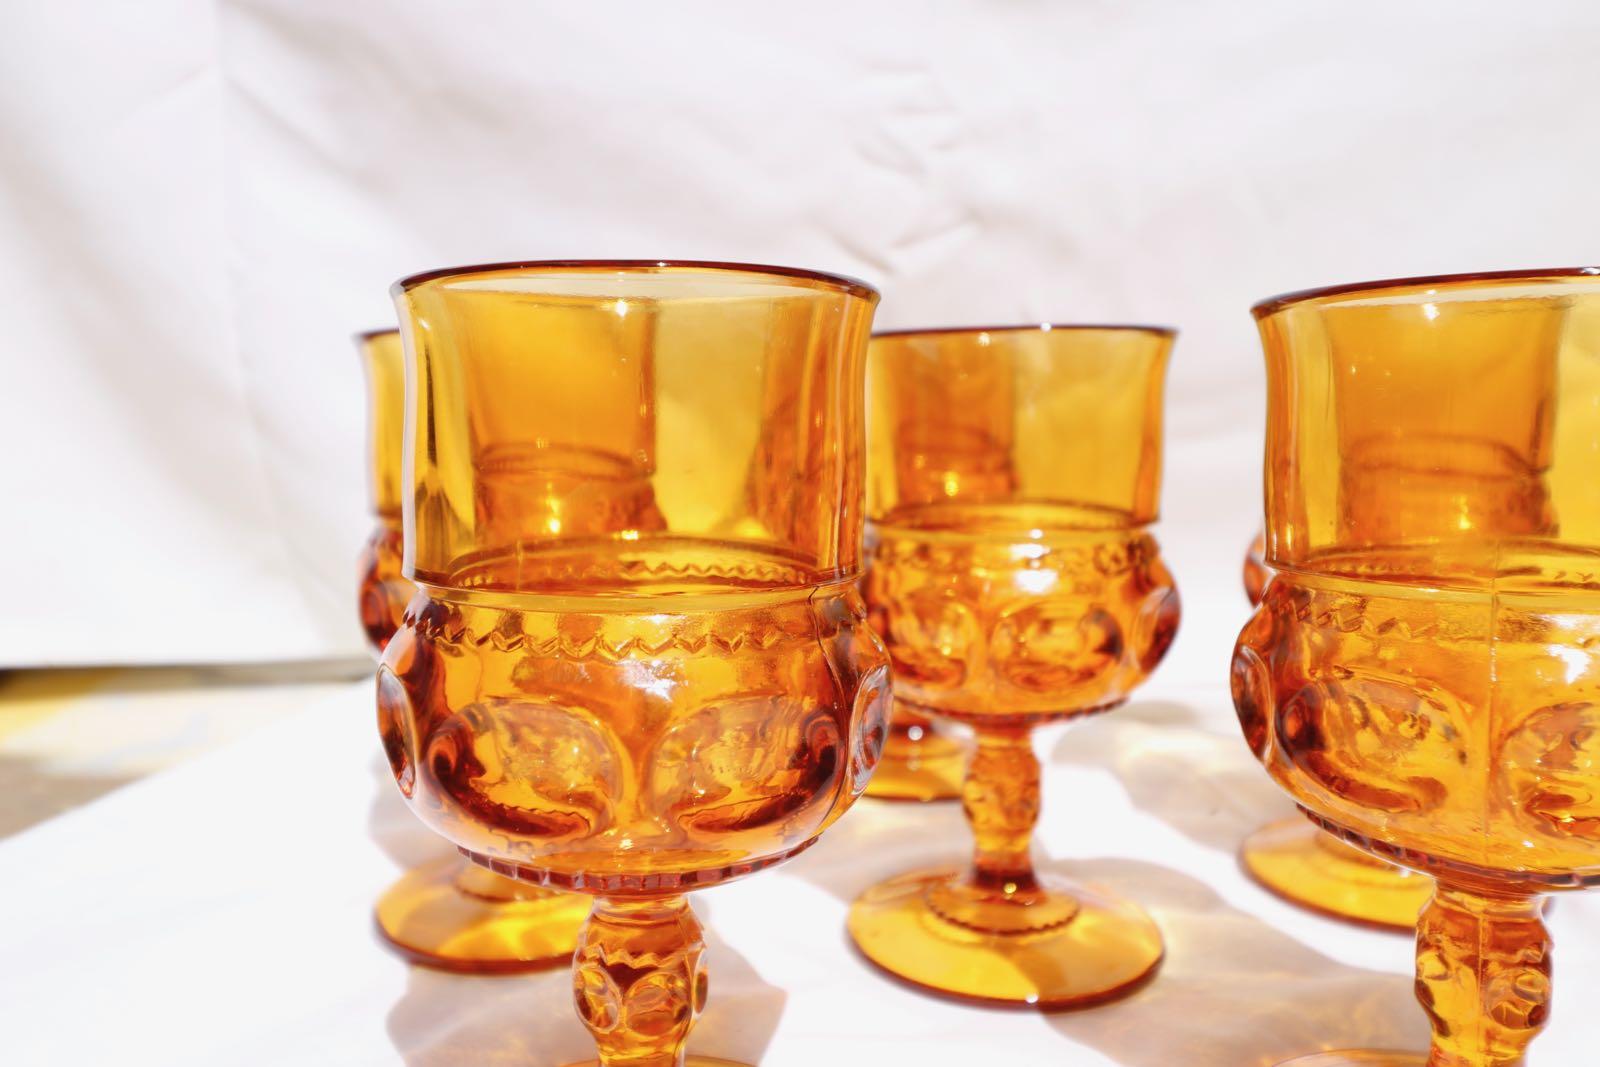 Magnificent amber glass 1960 midcentury amber glass water, wine or whisky set of six glasses. Depression goblets for a midcentury setting! The color of these glasses is magnificent! So beautiful with great detail in the glass.